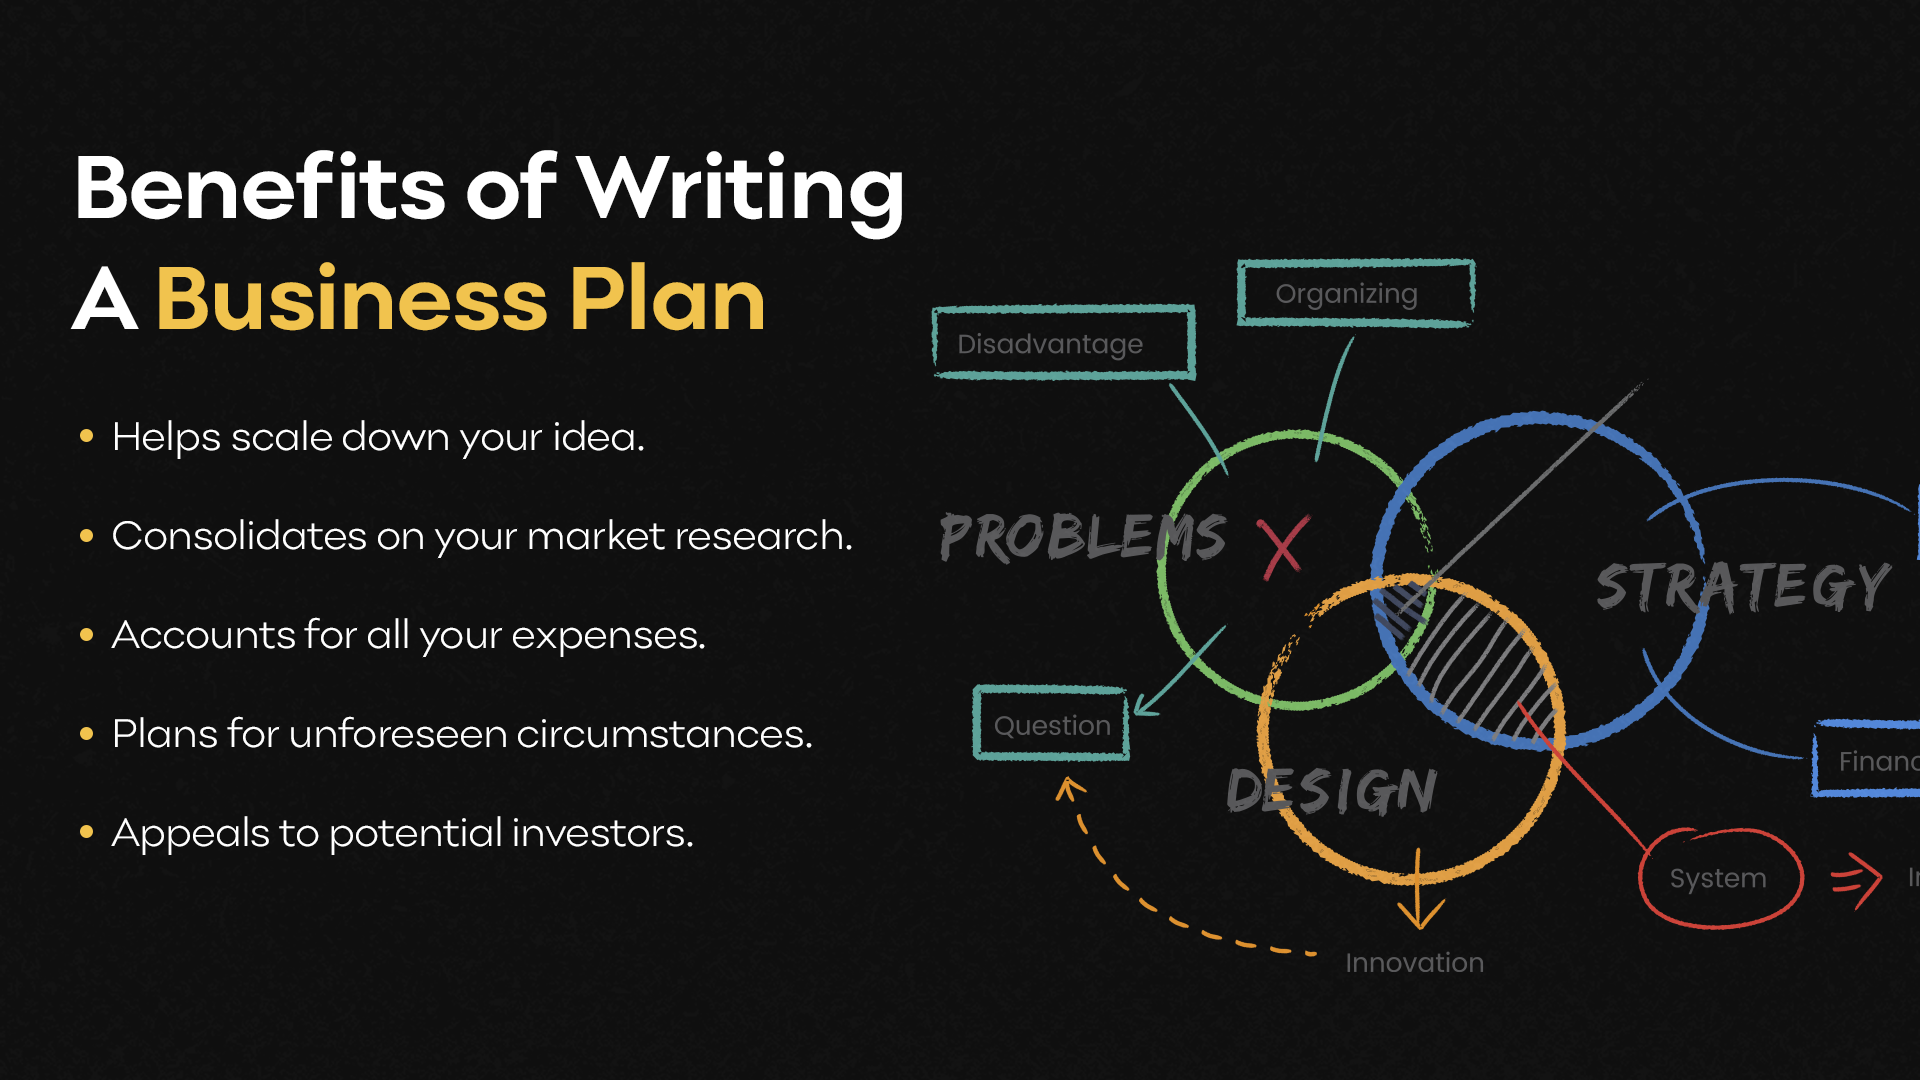 Benefits of writing a business plan